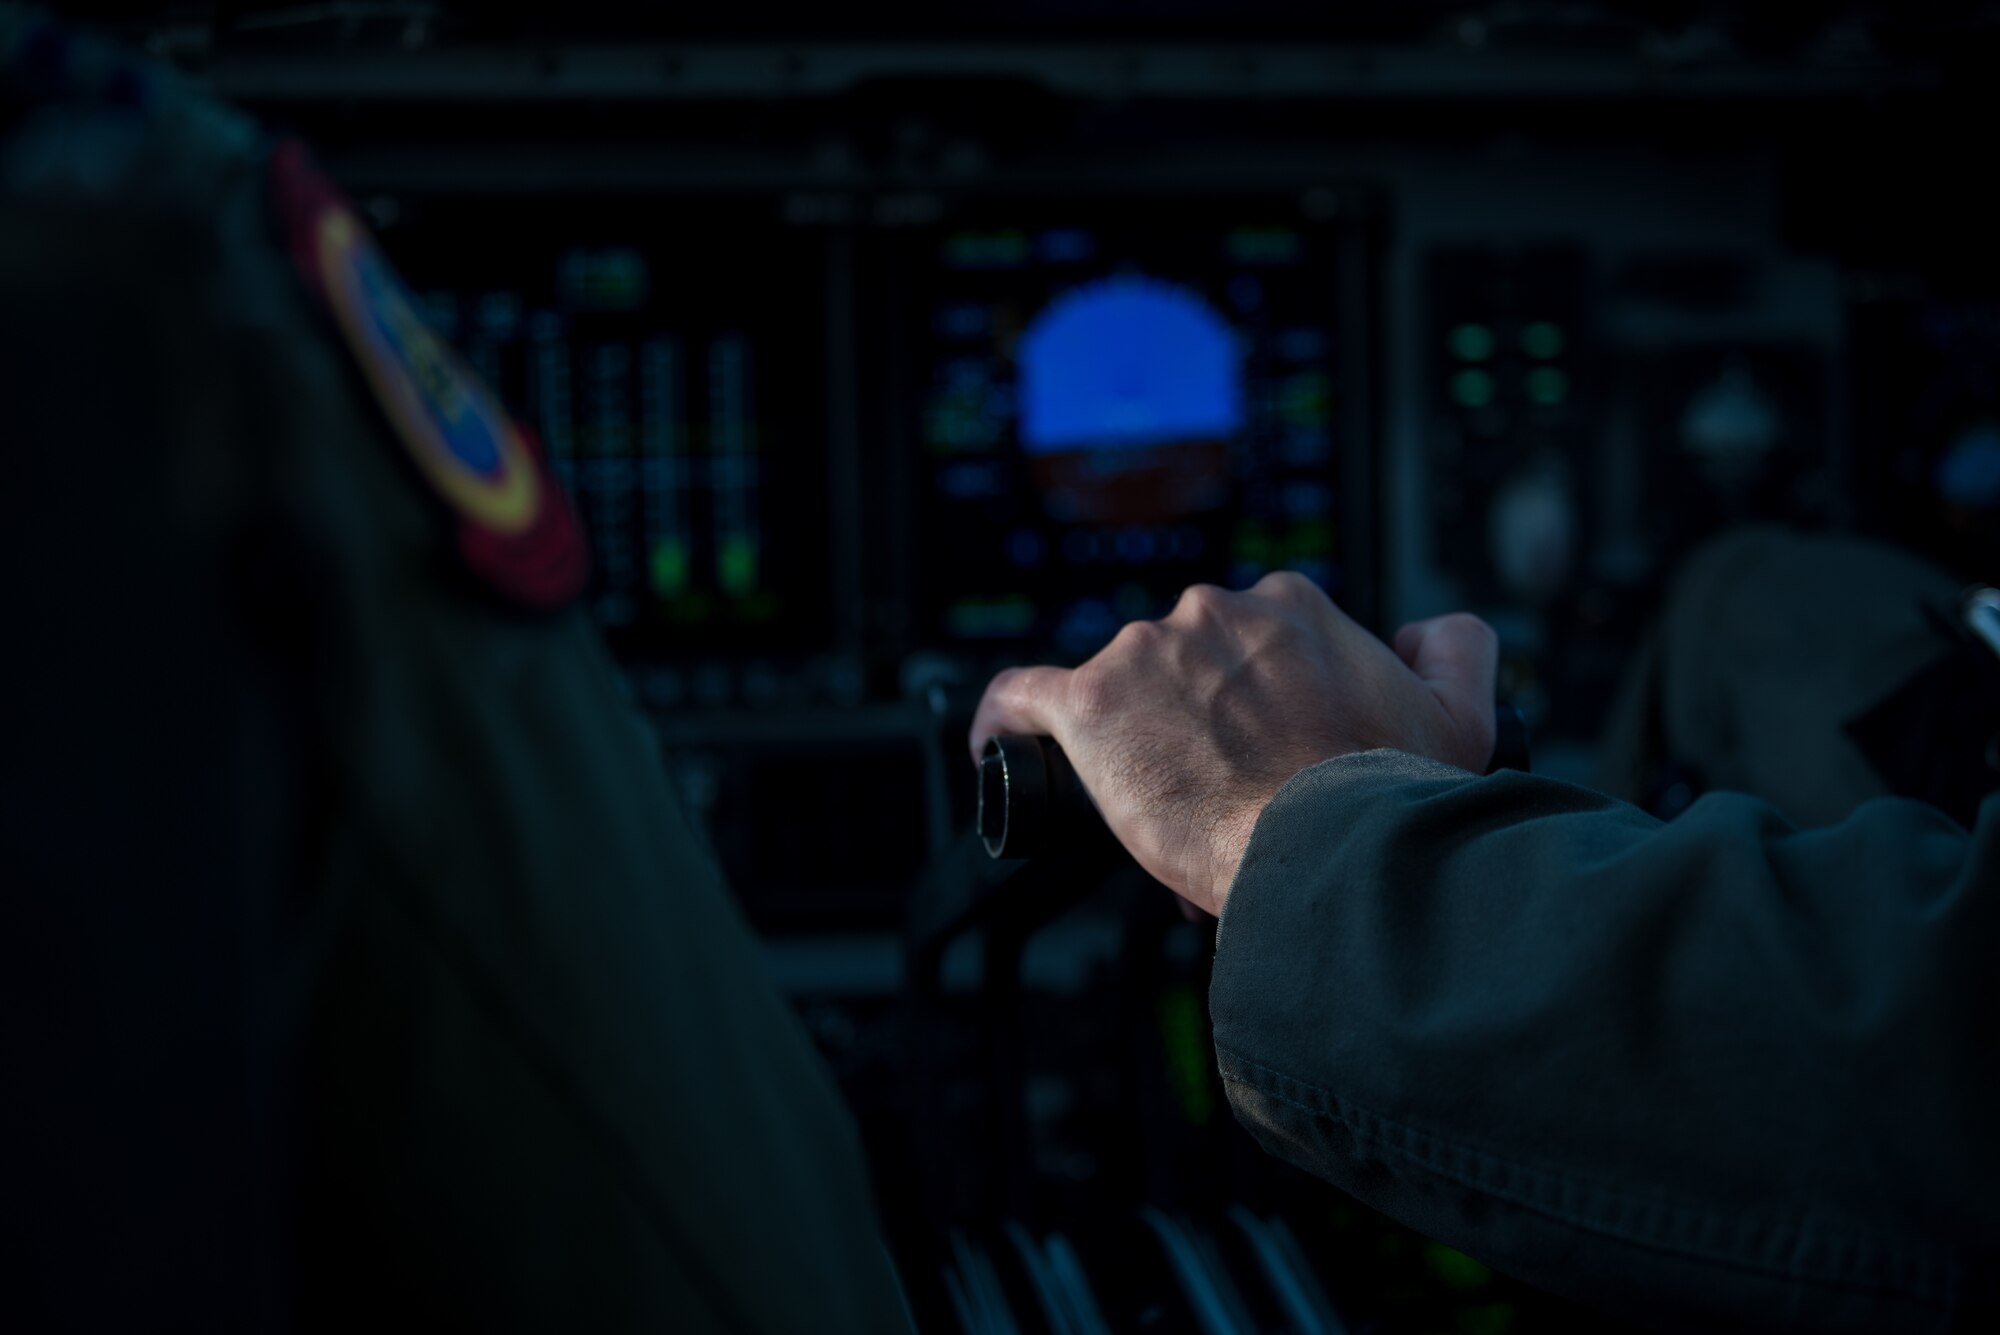 U.S. Air Force Capt. Sean Harte, 60th Air Mobility Wing Safety Office flight commander, flies a C-17 Globemaster III over California during a safety office familiarization flight July 2, 2018. The flight allowed Matt Stevens, a U.S. Department of Agriculture airport biologist, who helps manage the Bird/Wildlife Aircraft Strike Program at Travis Air Force Base, Calif., to get a firsthand view of what pilots see during training flights near the base. (U.S. Air Force photo by Master Sgt. Joey Swafford)